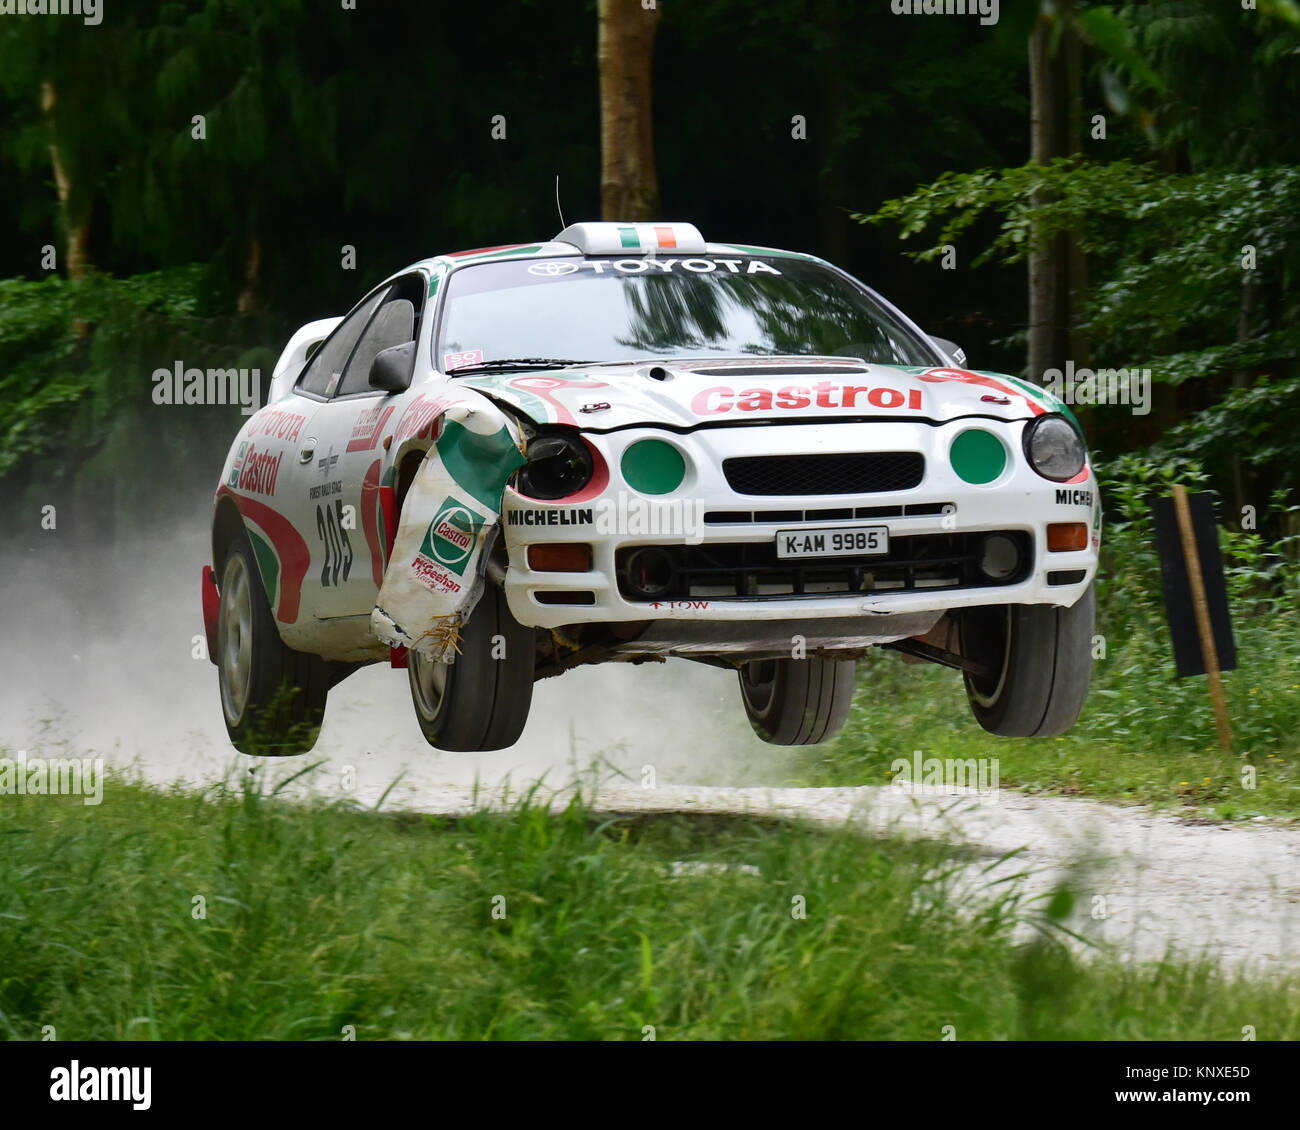 A slight scuff on the front wing, Mark Courtney, Toyota Celica GT-Four ST205, K-AM 9985, Forest rally stage, Goodwood FoS 2015, 2015, Classic, dust, e Stock Photo